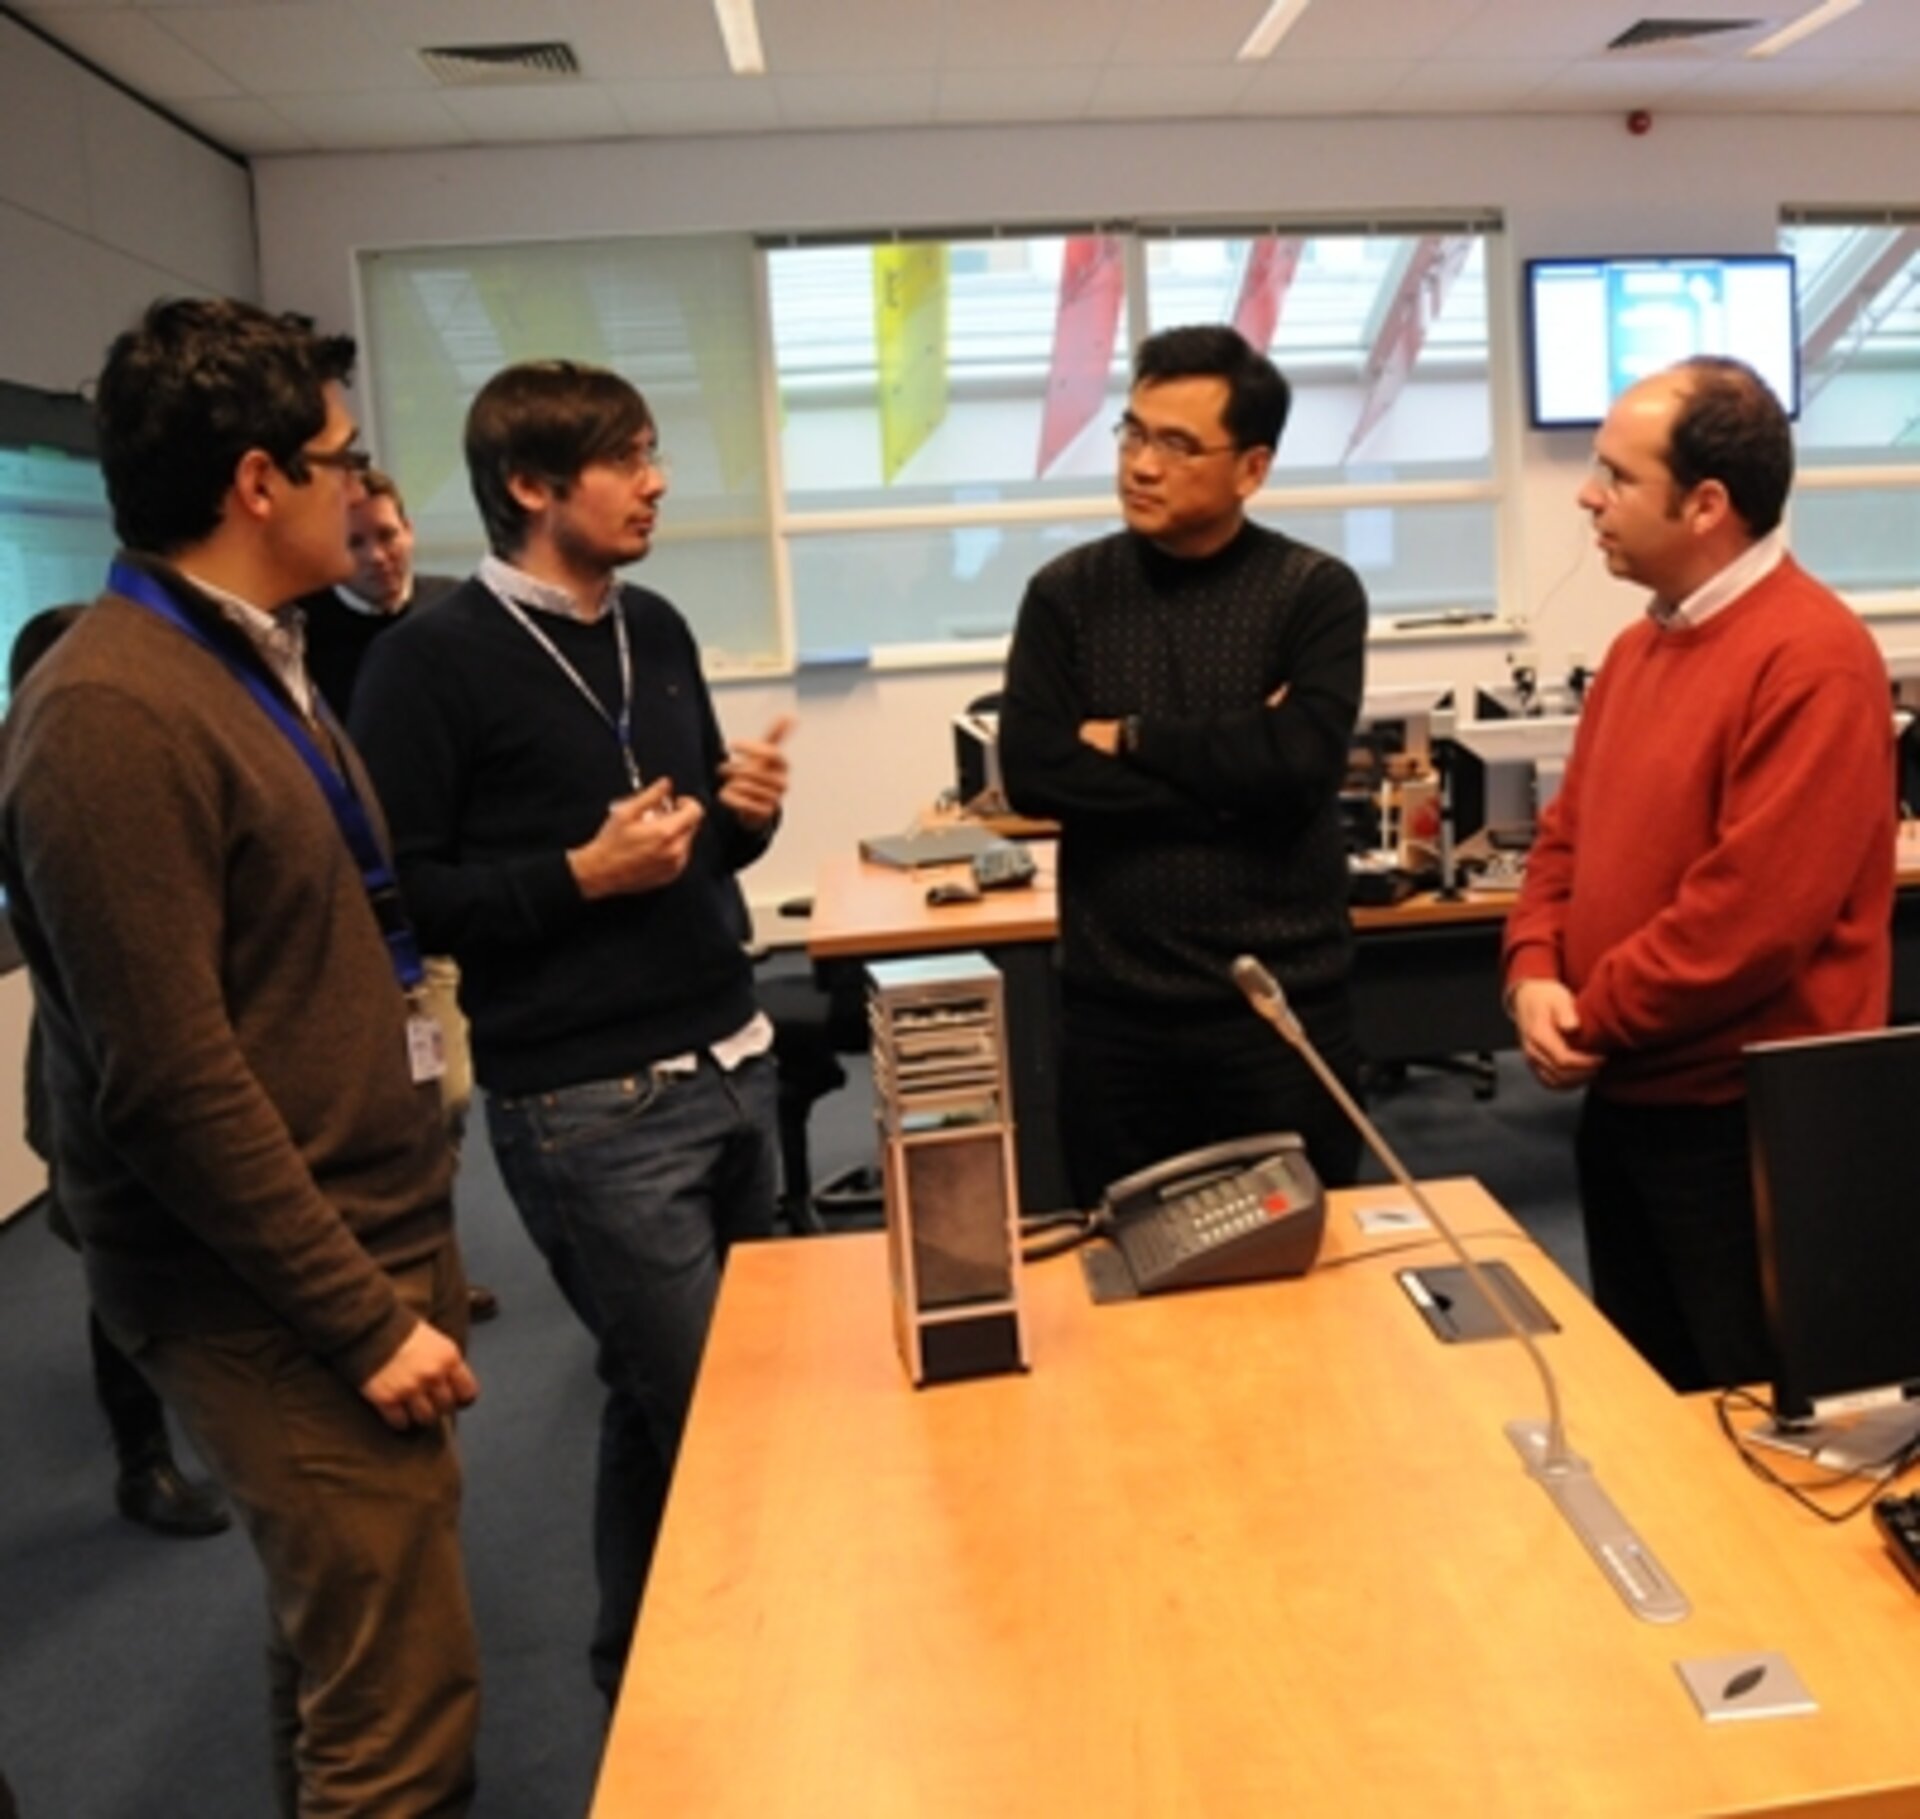 OPS-SAT team members around the 1:1 scale model of the CubeSat